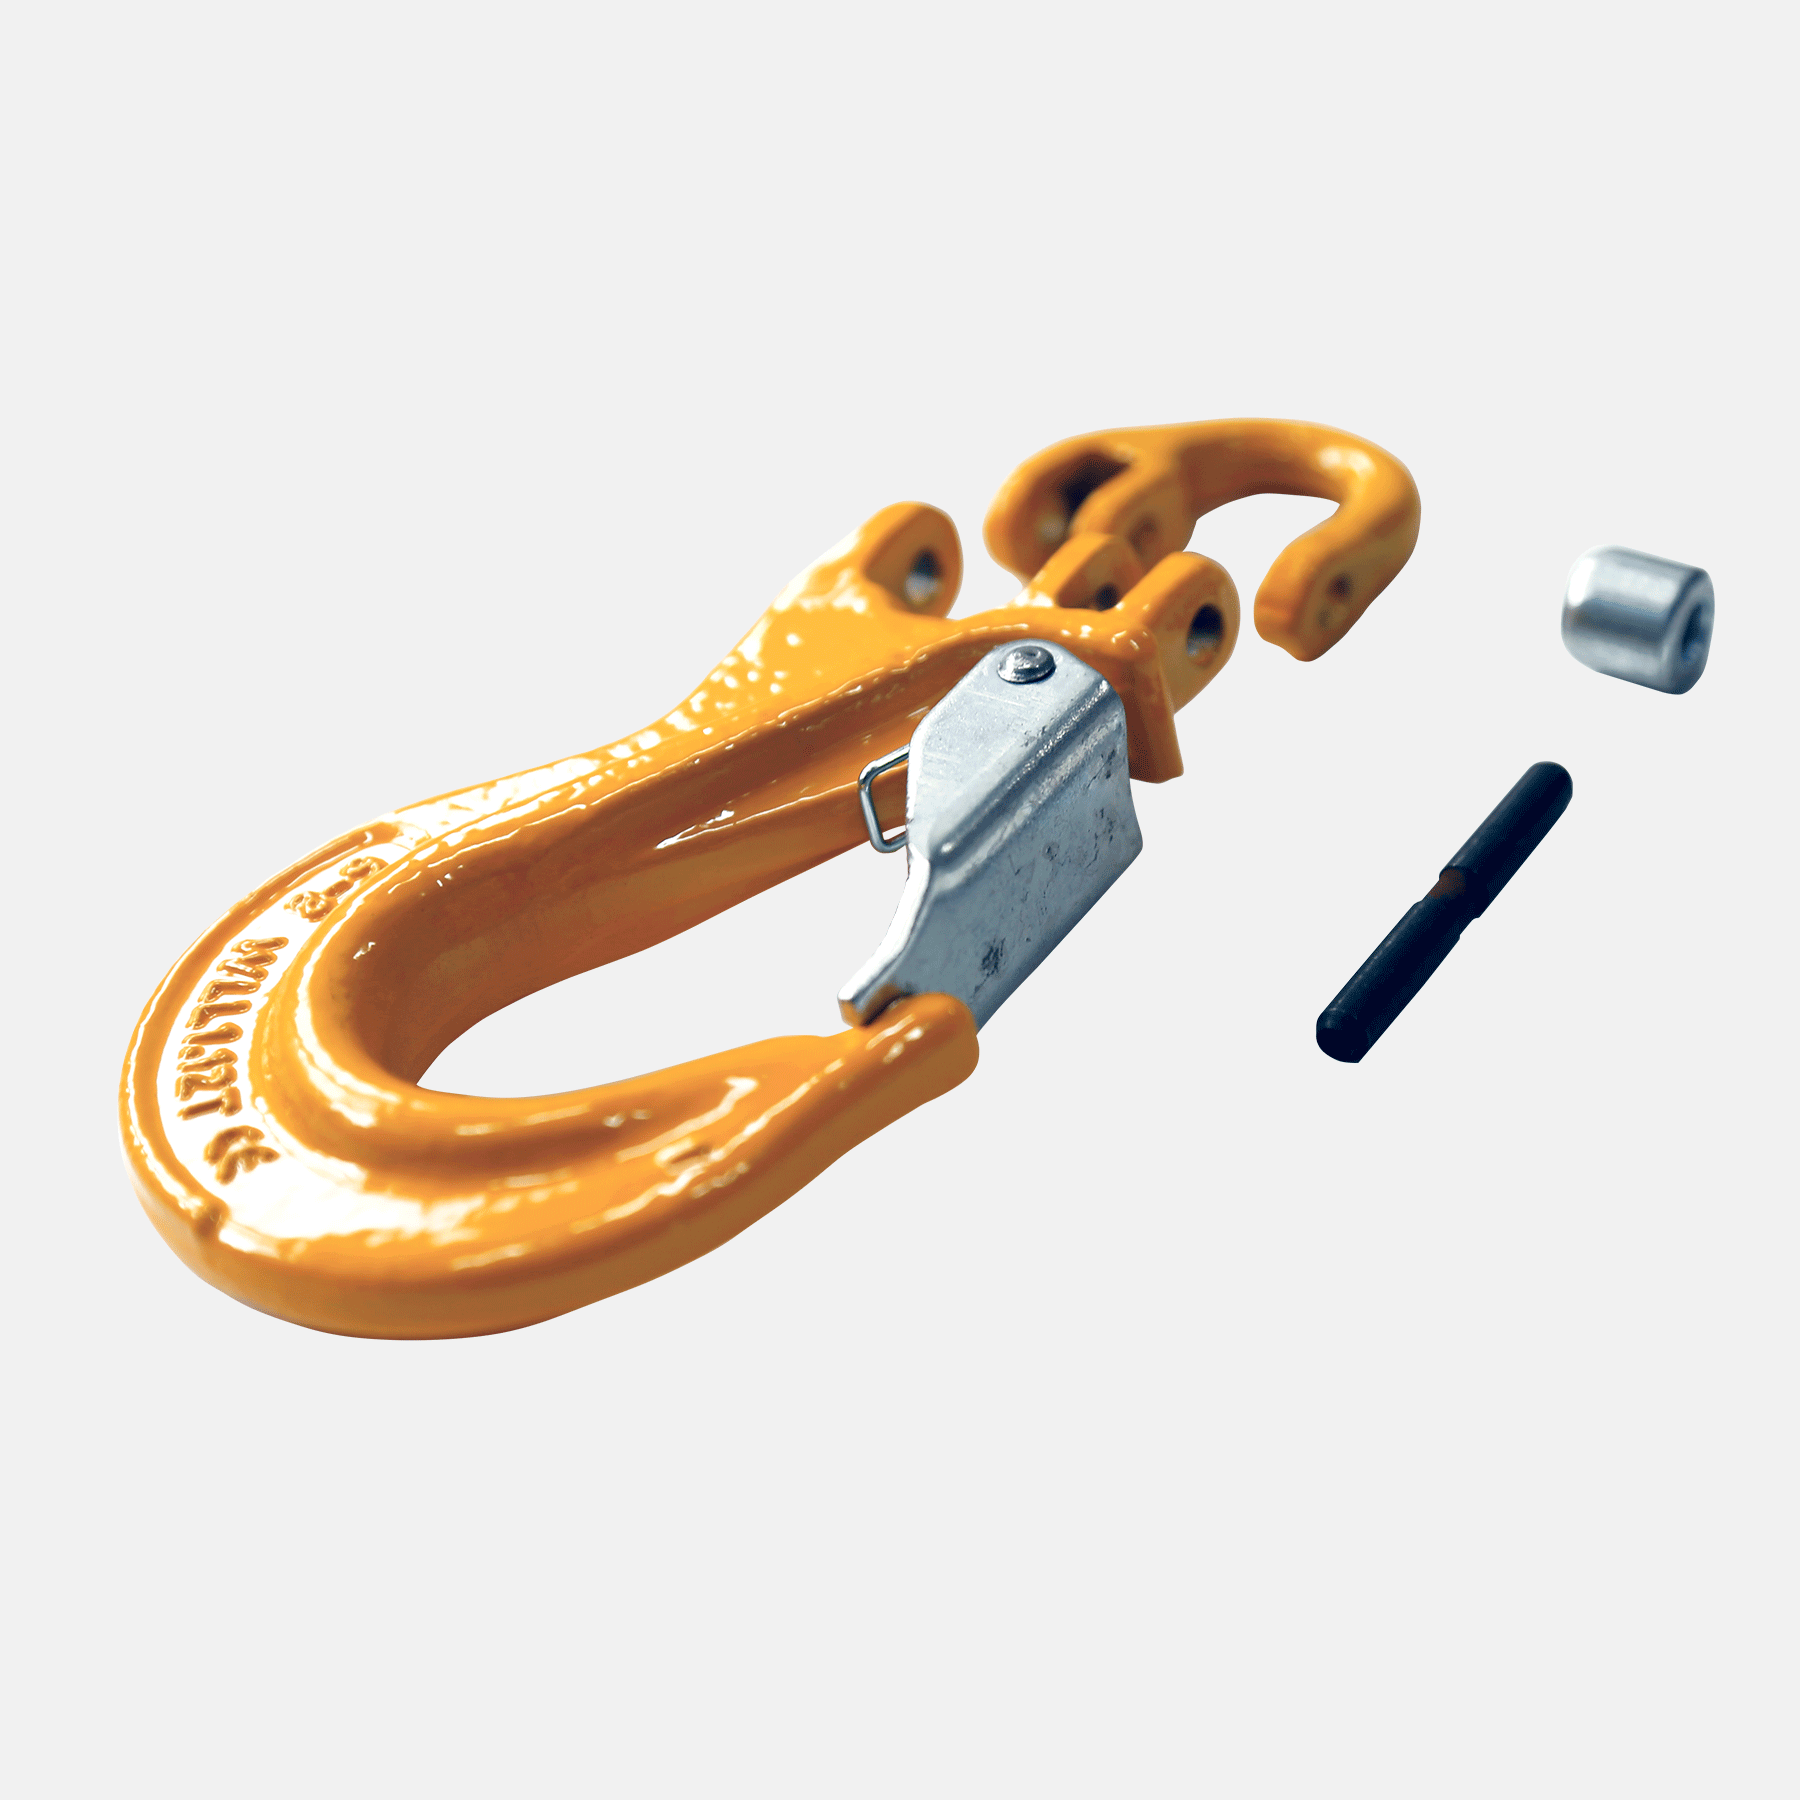 Winch hook for synthetic ropes 4 tons breaking load